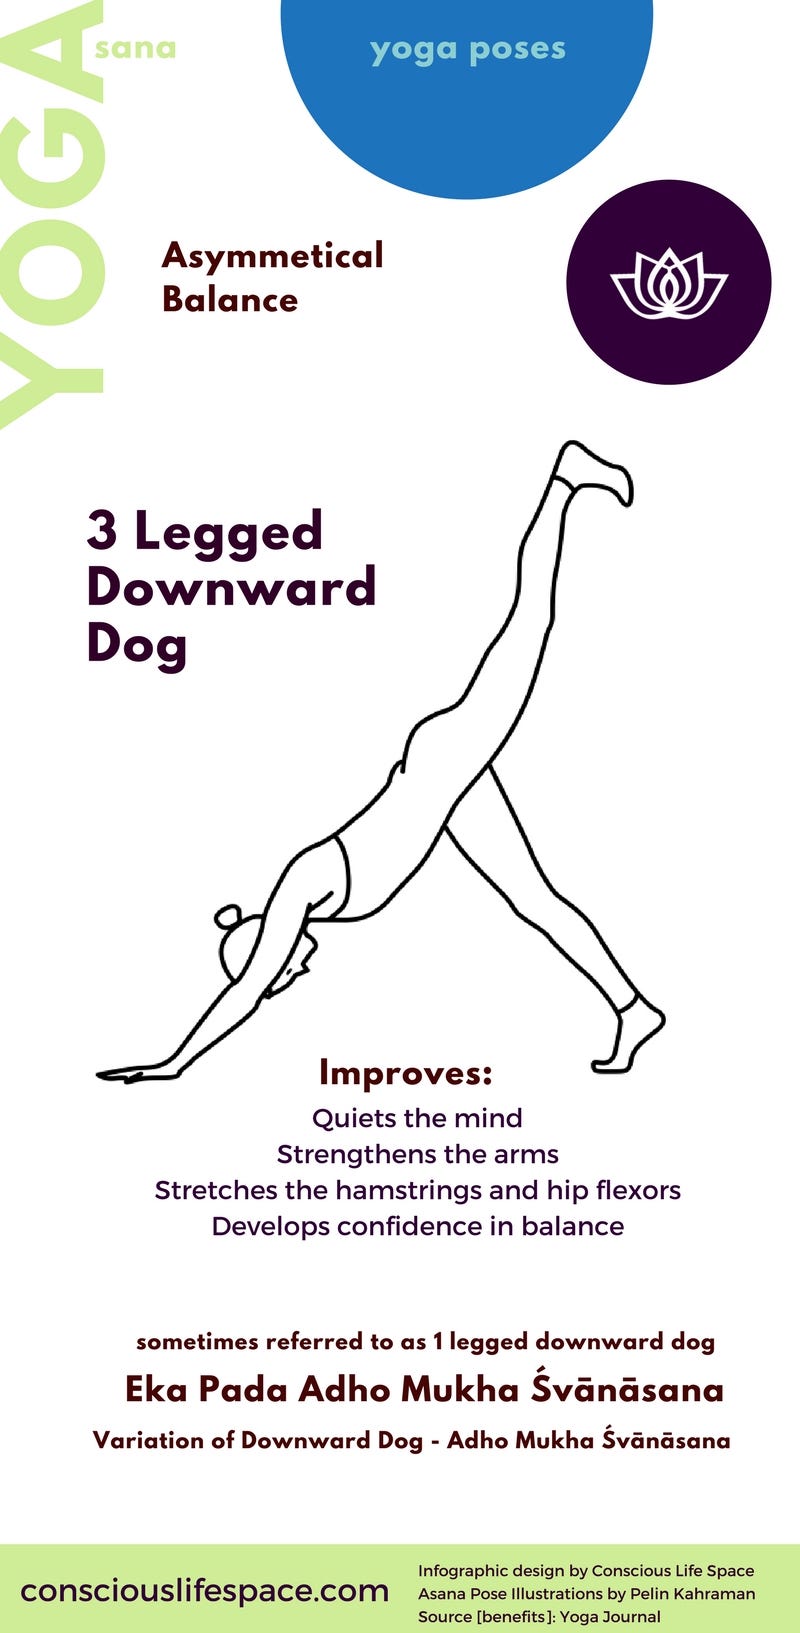 3 legged downward dog asana - yoga pose infographic created by conscious life space CC4.0 Intl Attribution